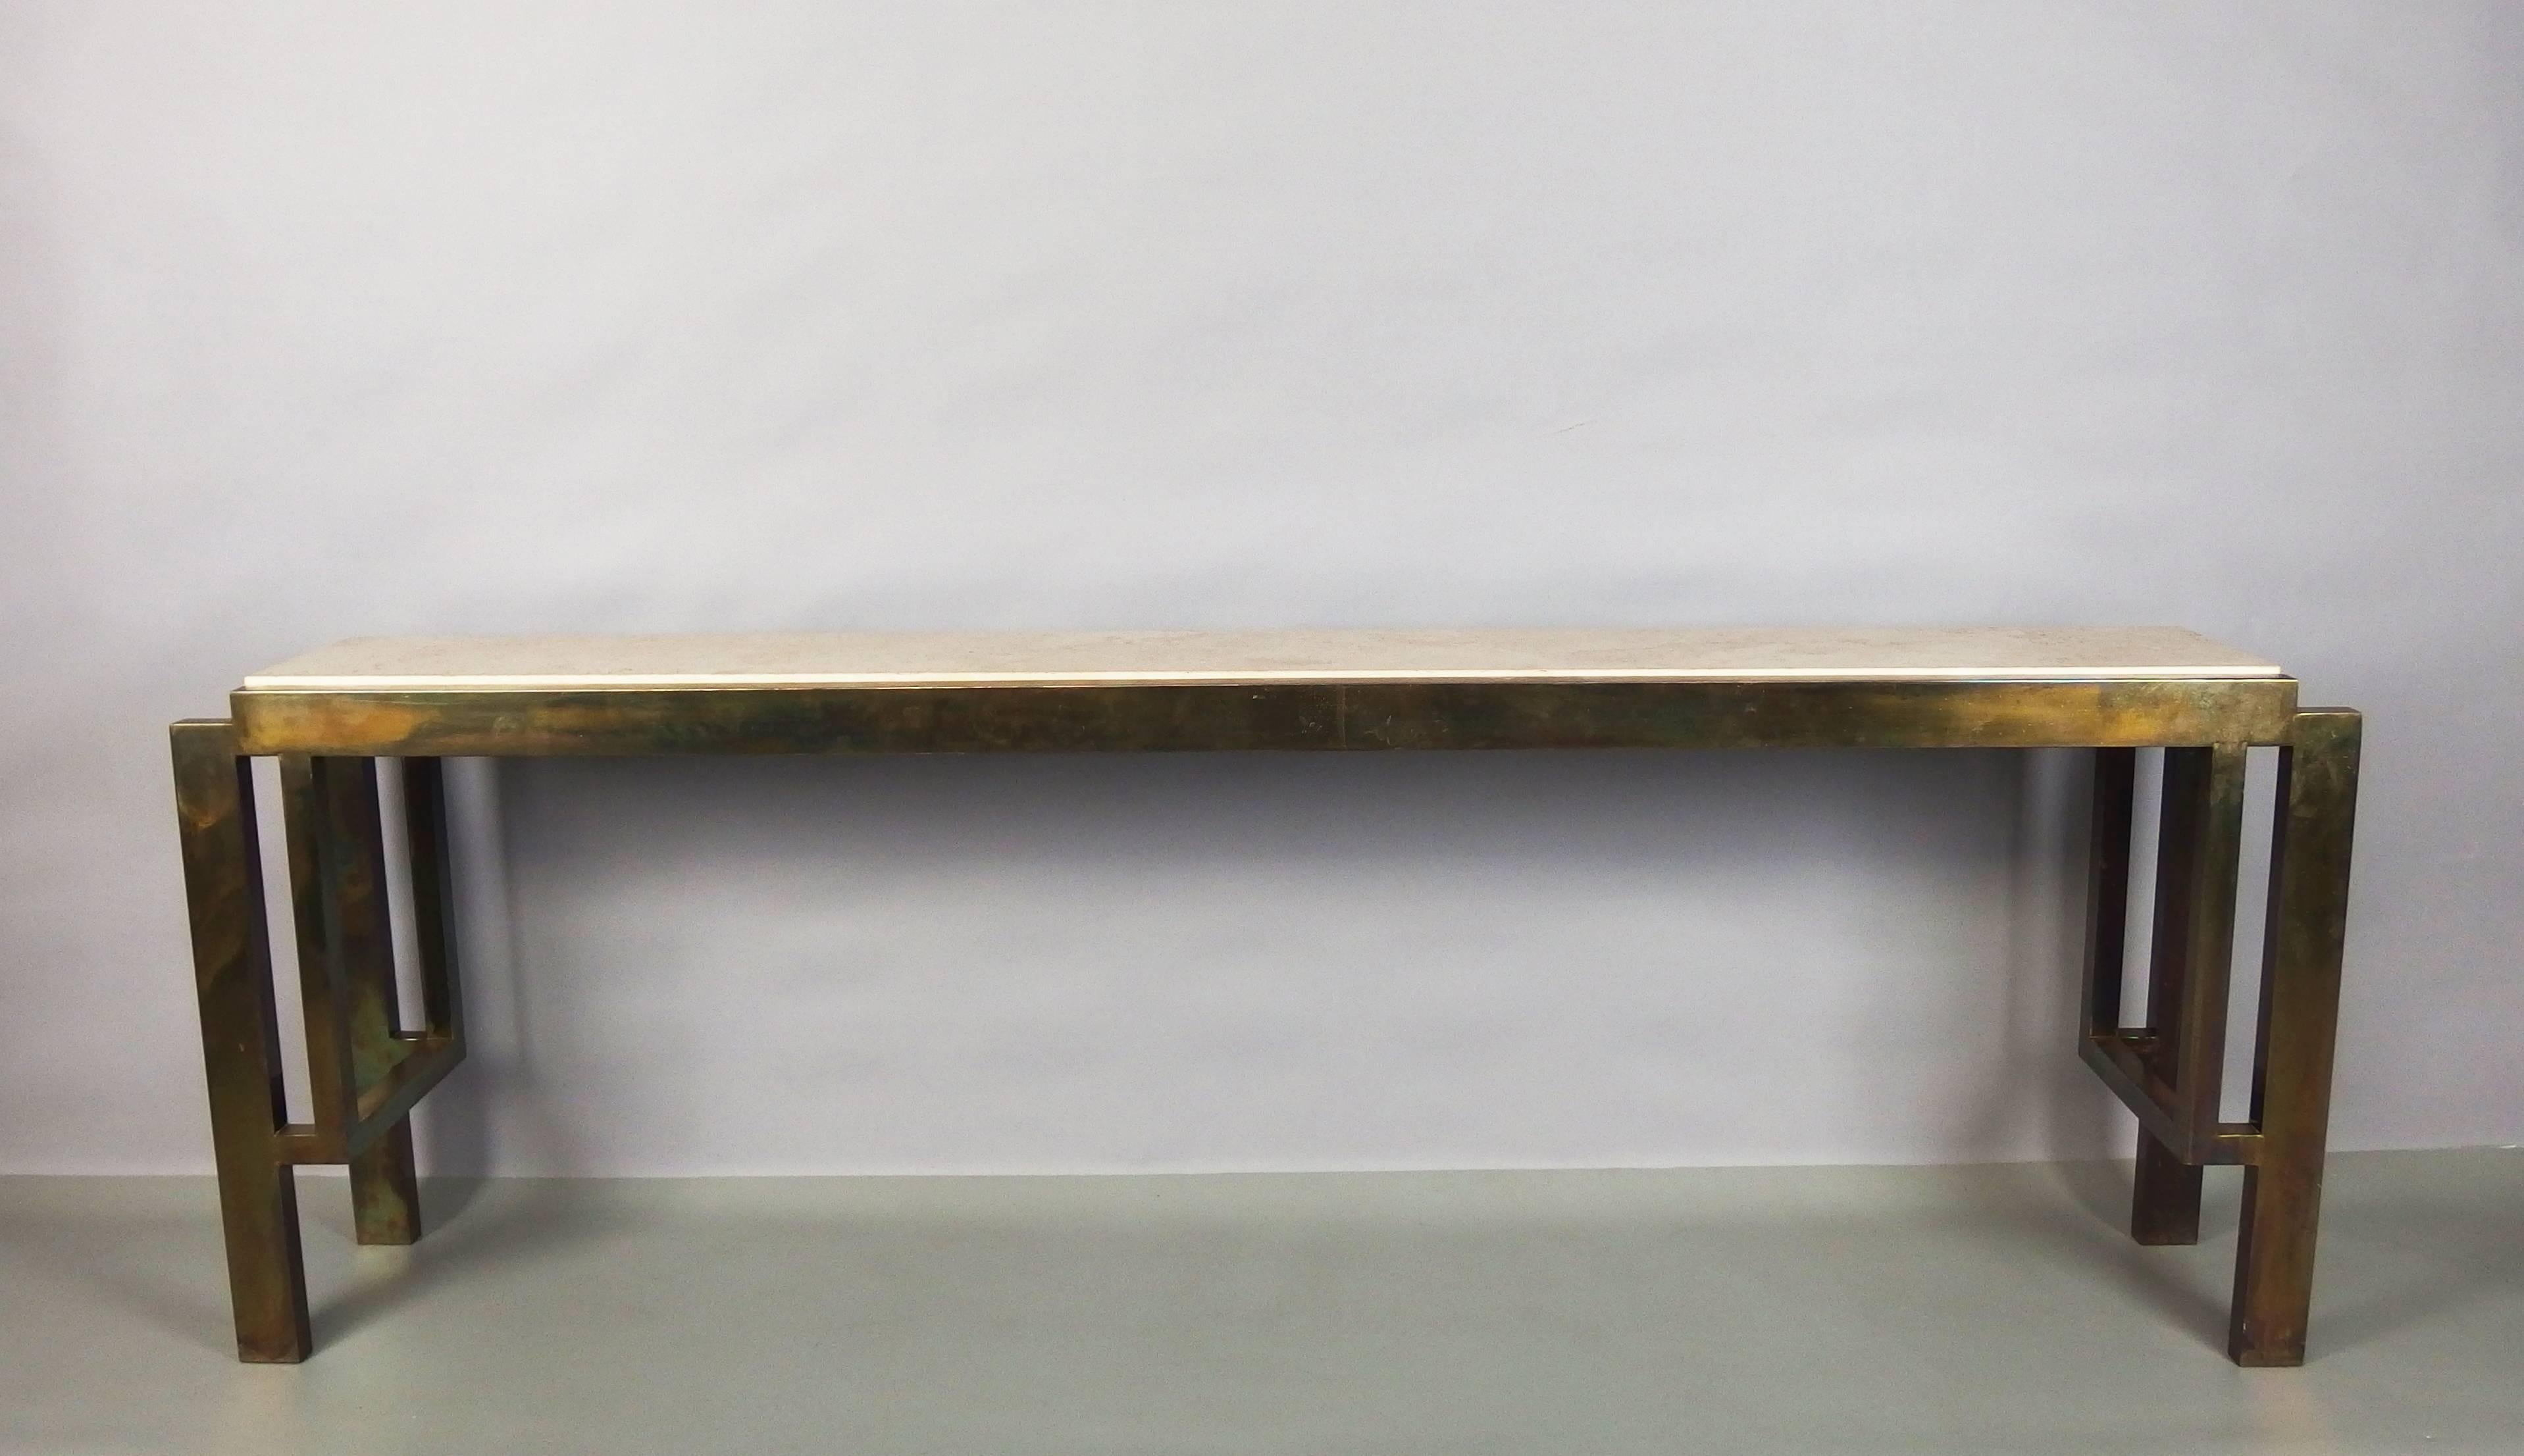 A patinated brass console table with a travertine top.